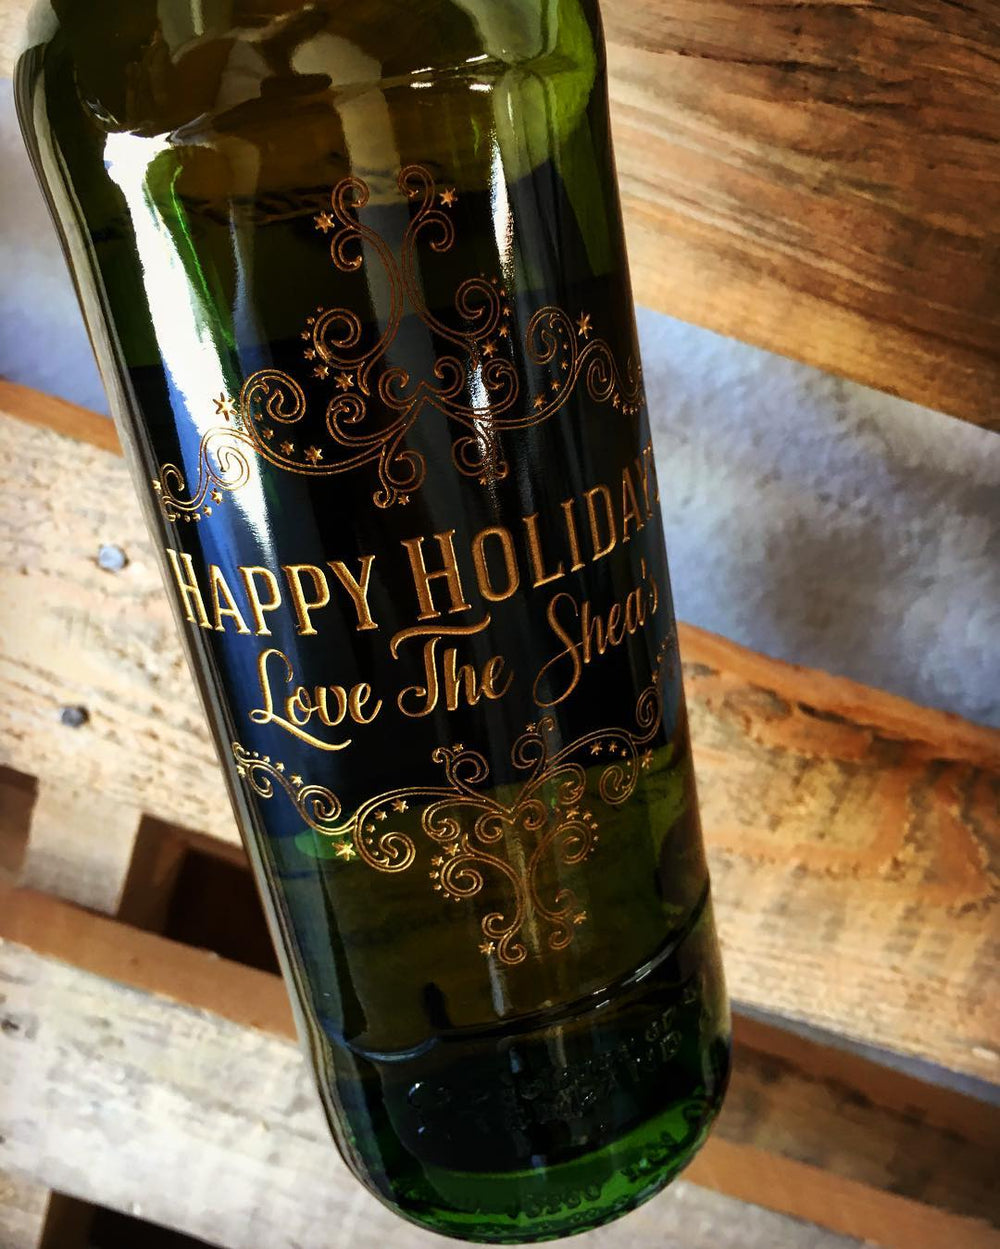 Happy Holidays custom whiskey bottle by Etching Expressions